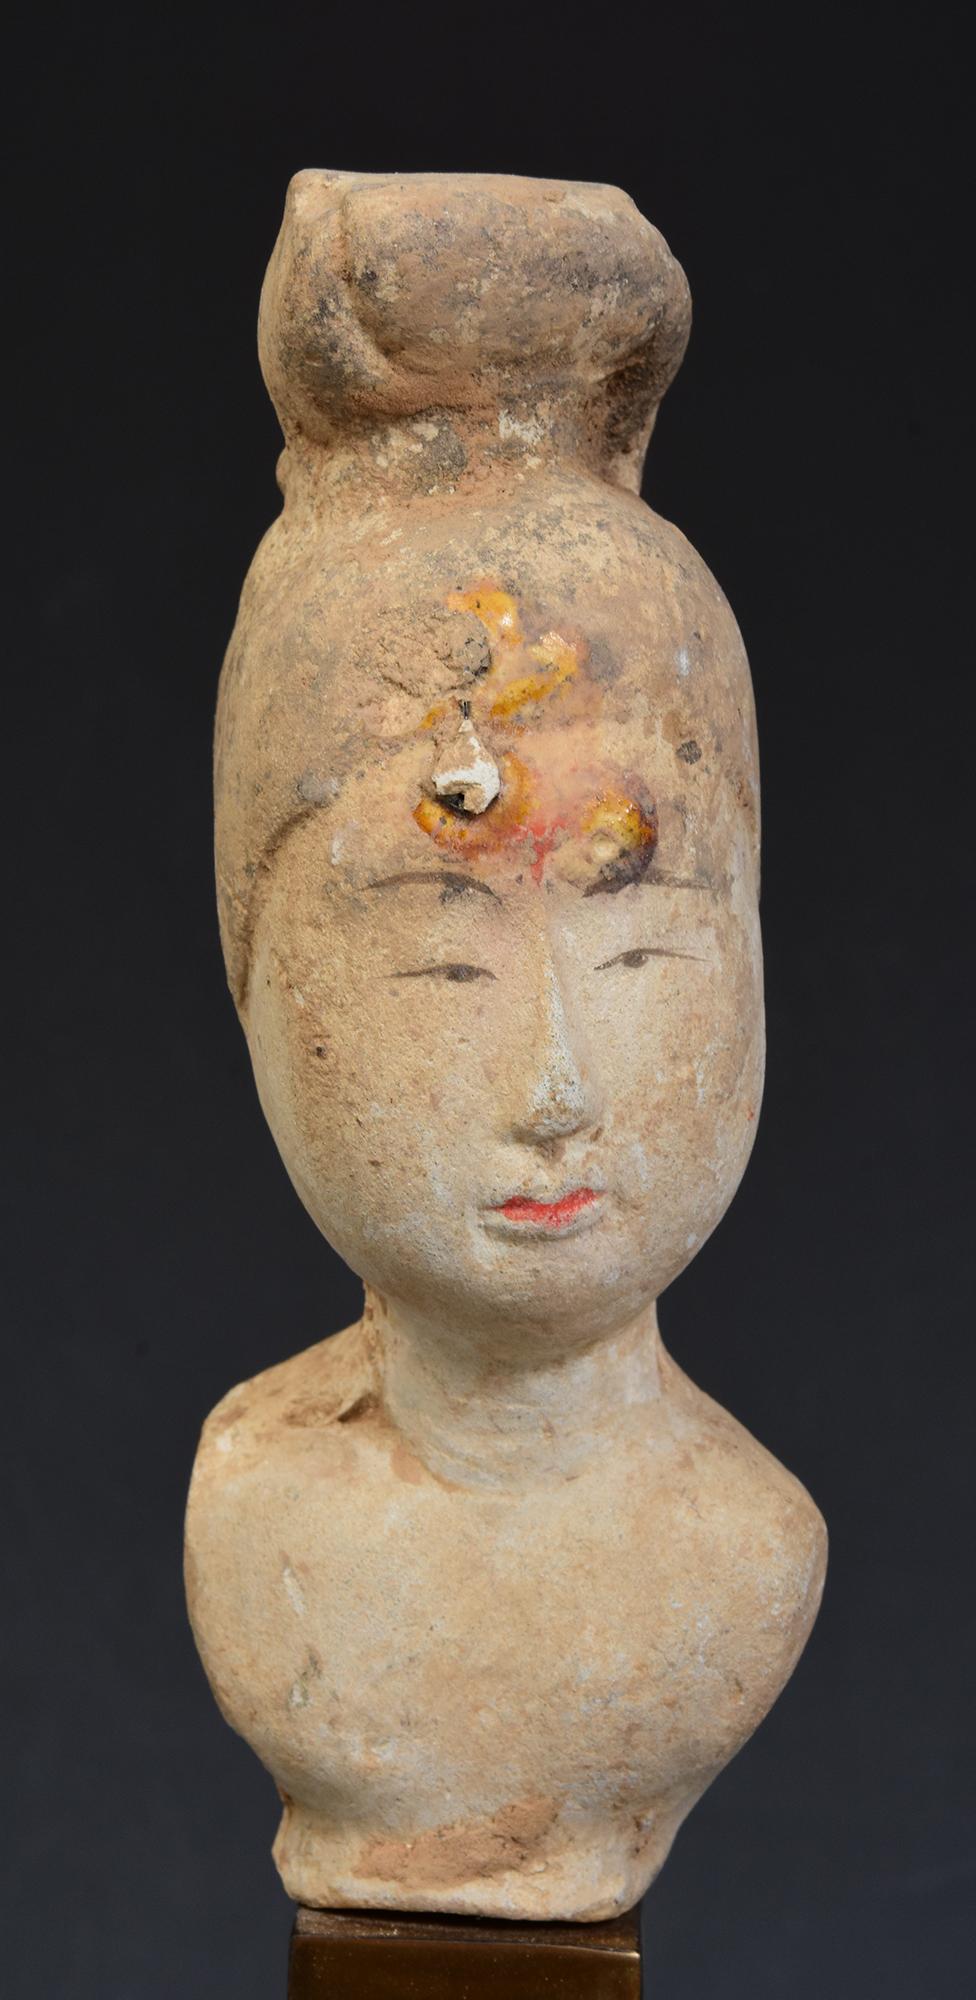 Antique Chinese painted pottery torso of court lady, with original pigments remaining.

Age: China, Tang Dynasty, A.D. 618 - 907
Size of torso only: Height 12.5 C.M. / Width 4.7 C.M. / Depth 5.2 C.M.
Height including stand: 28.2 C.M.
Condition: